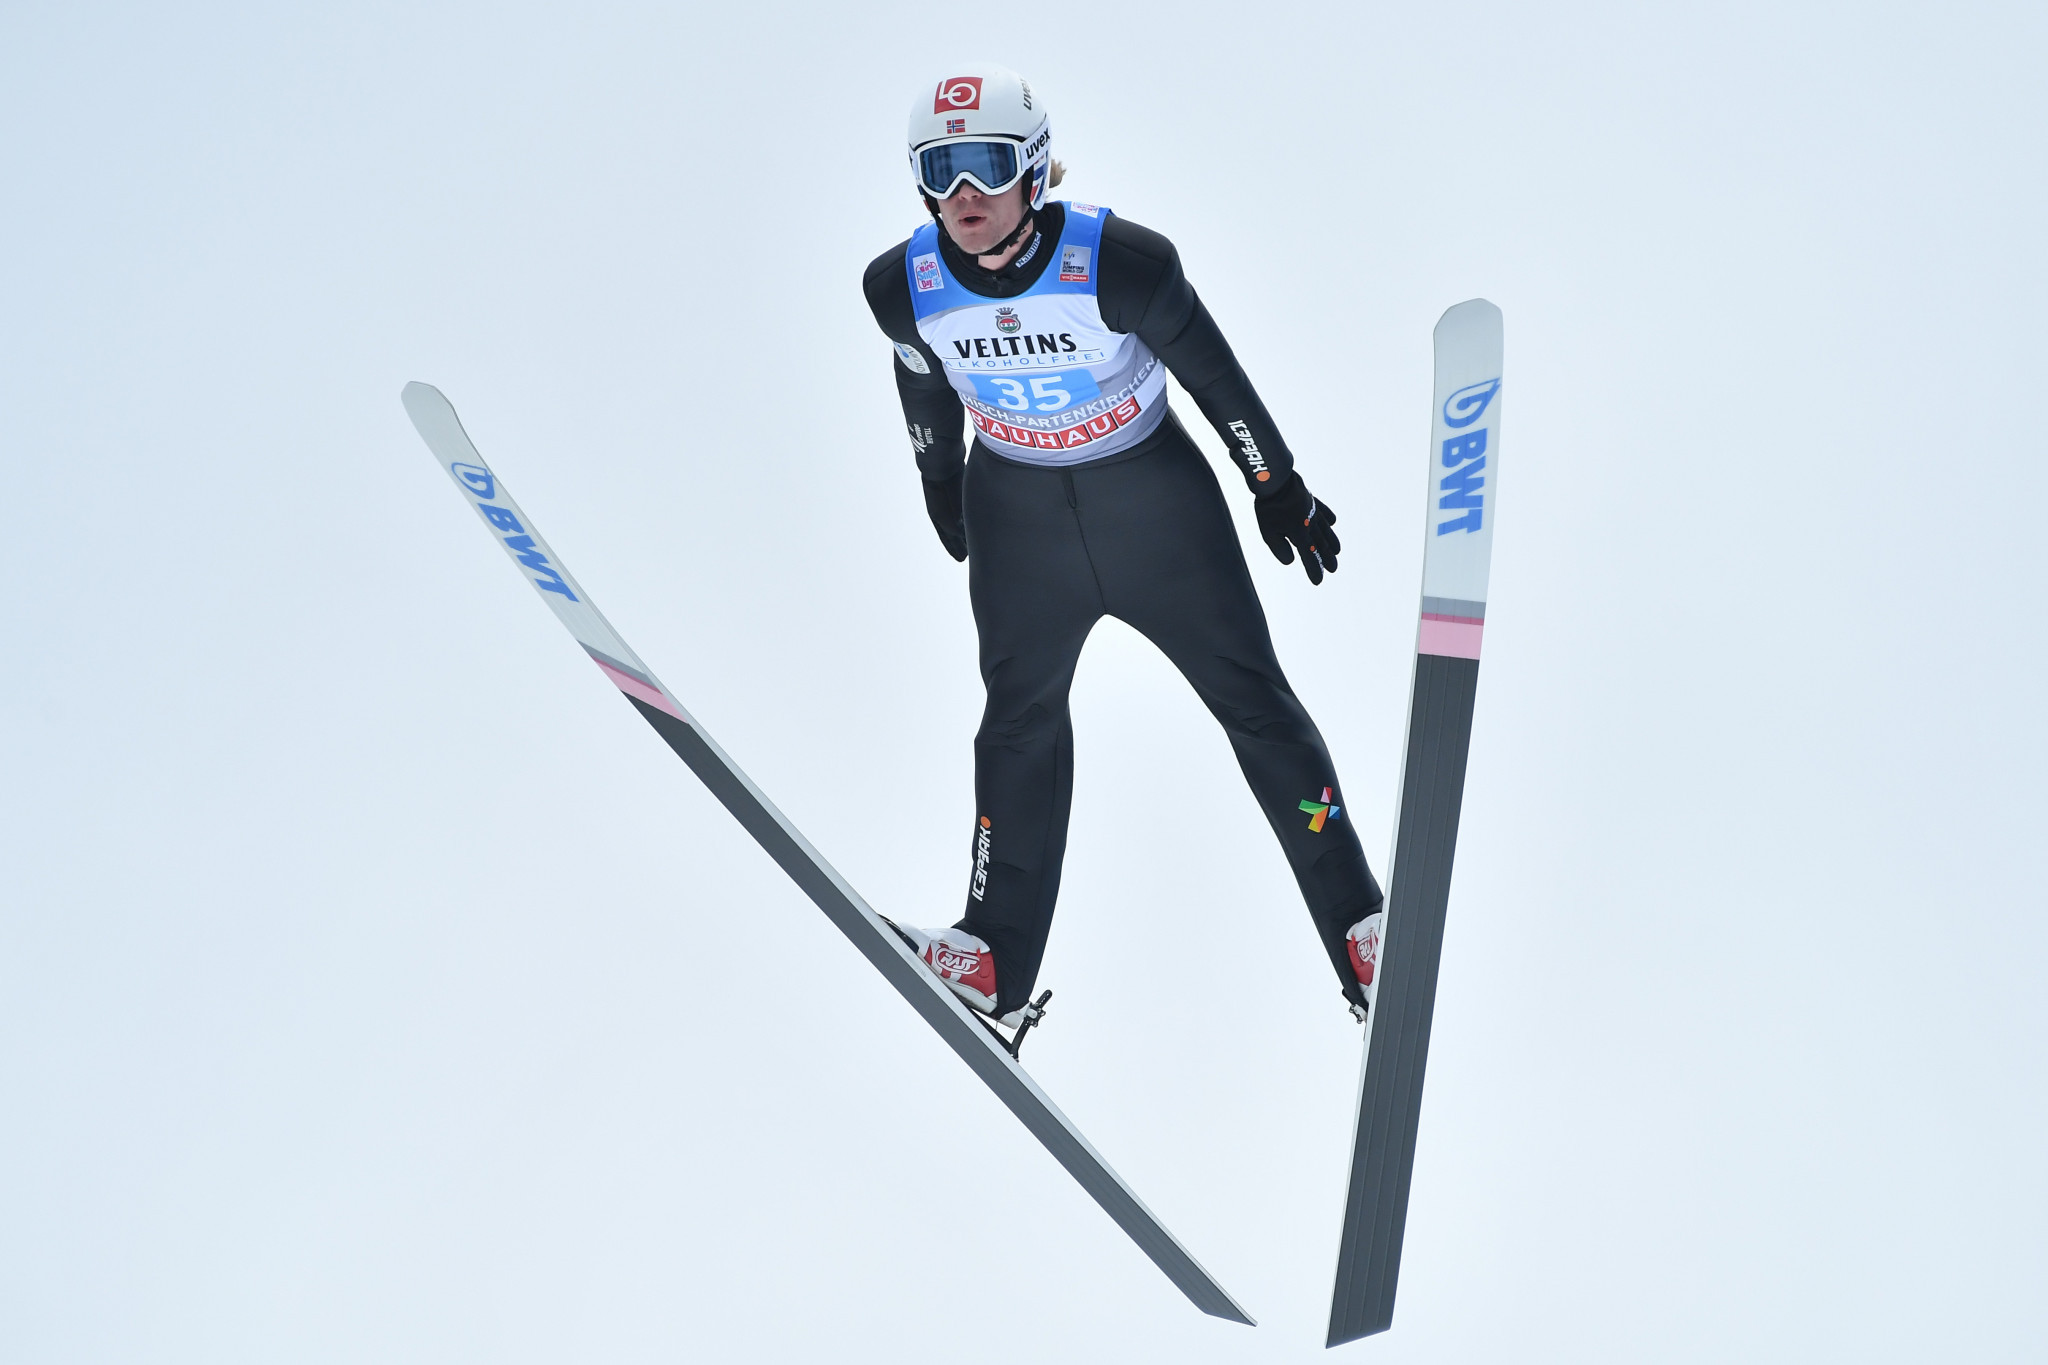 Stjernen and Tande to miss FIS Ski Jumping World Cup in Wellingen